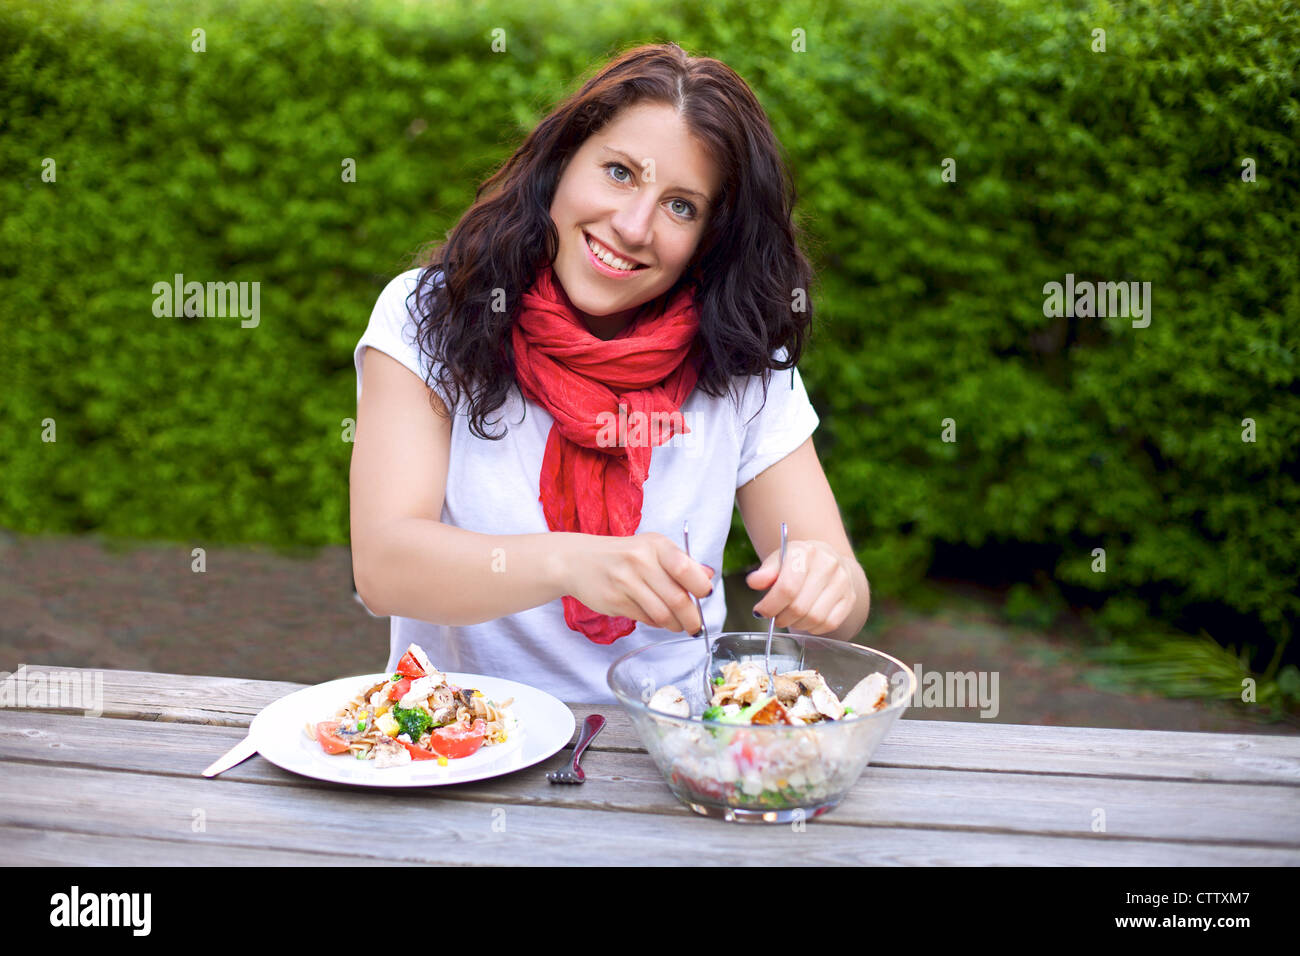 Portrait of a woman smiling while preparing a bowl of salad outdoors Stock Photo